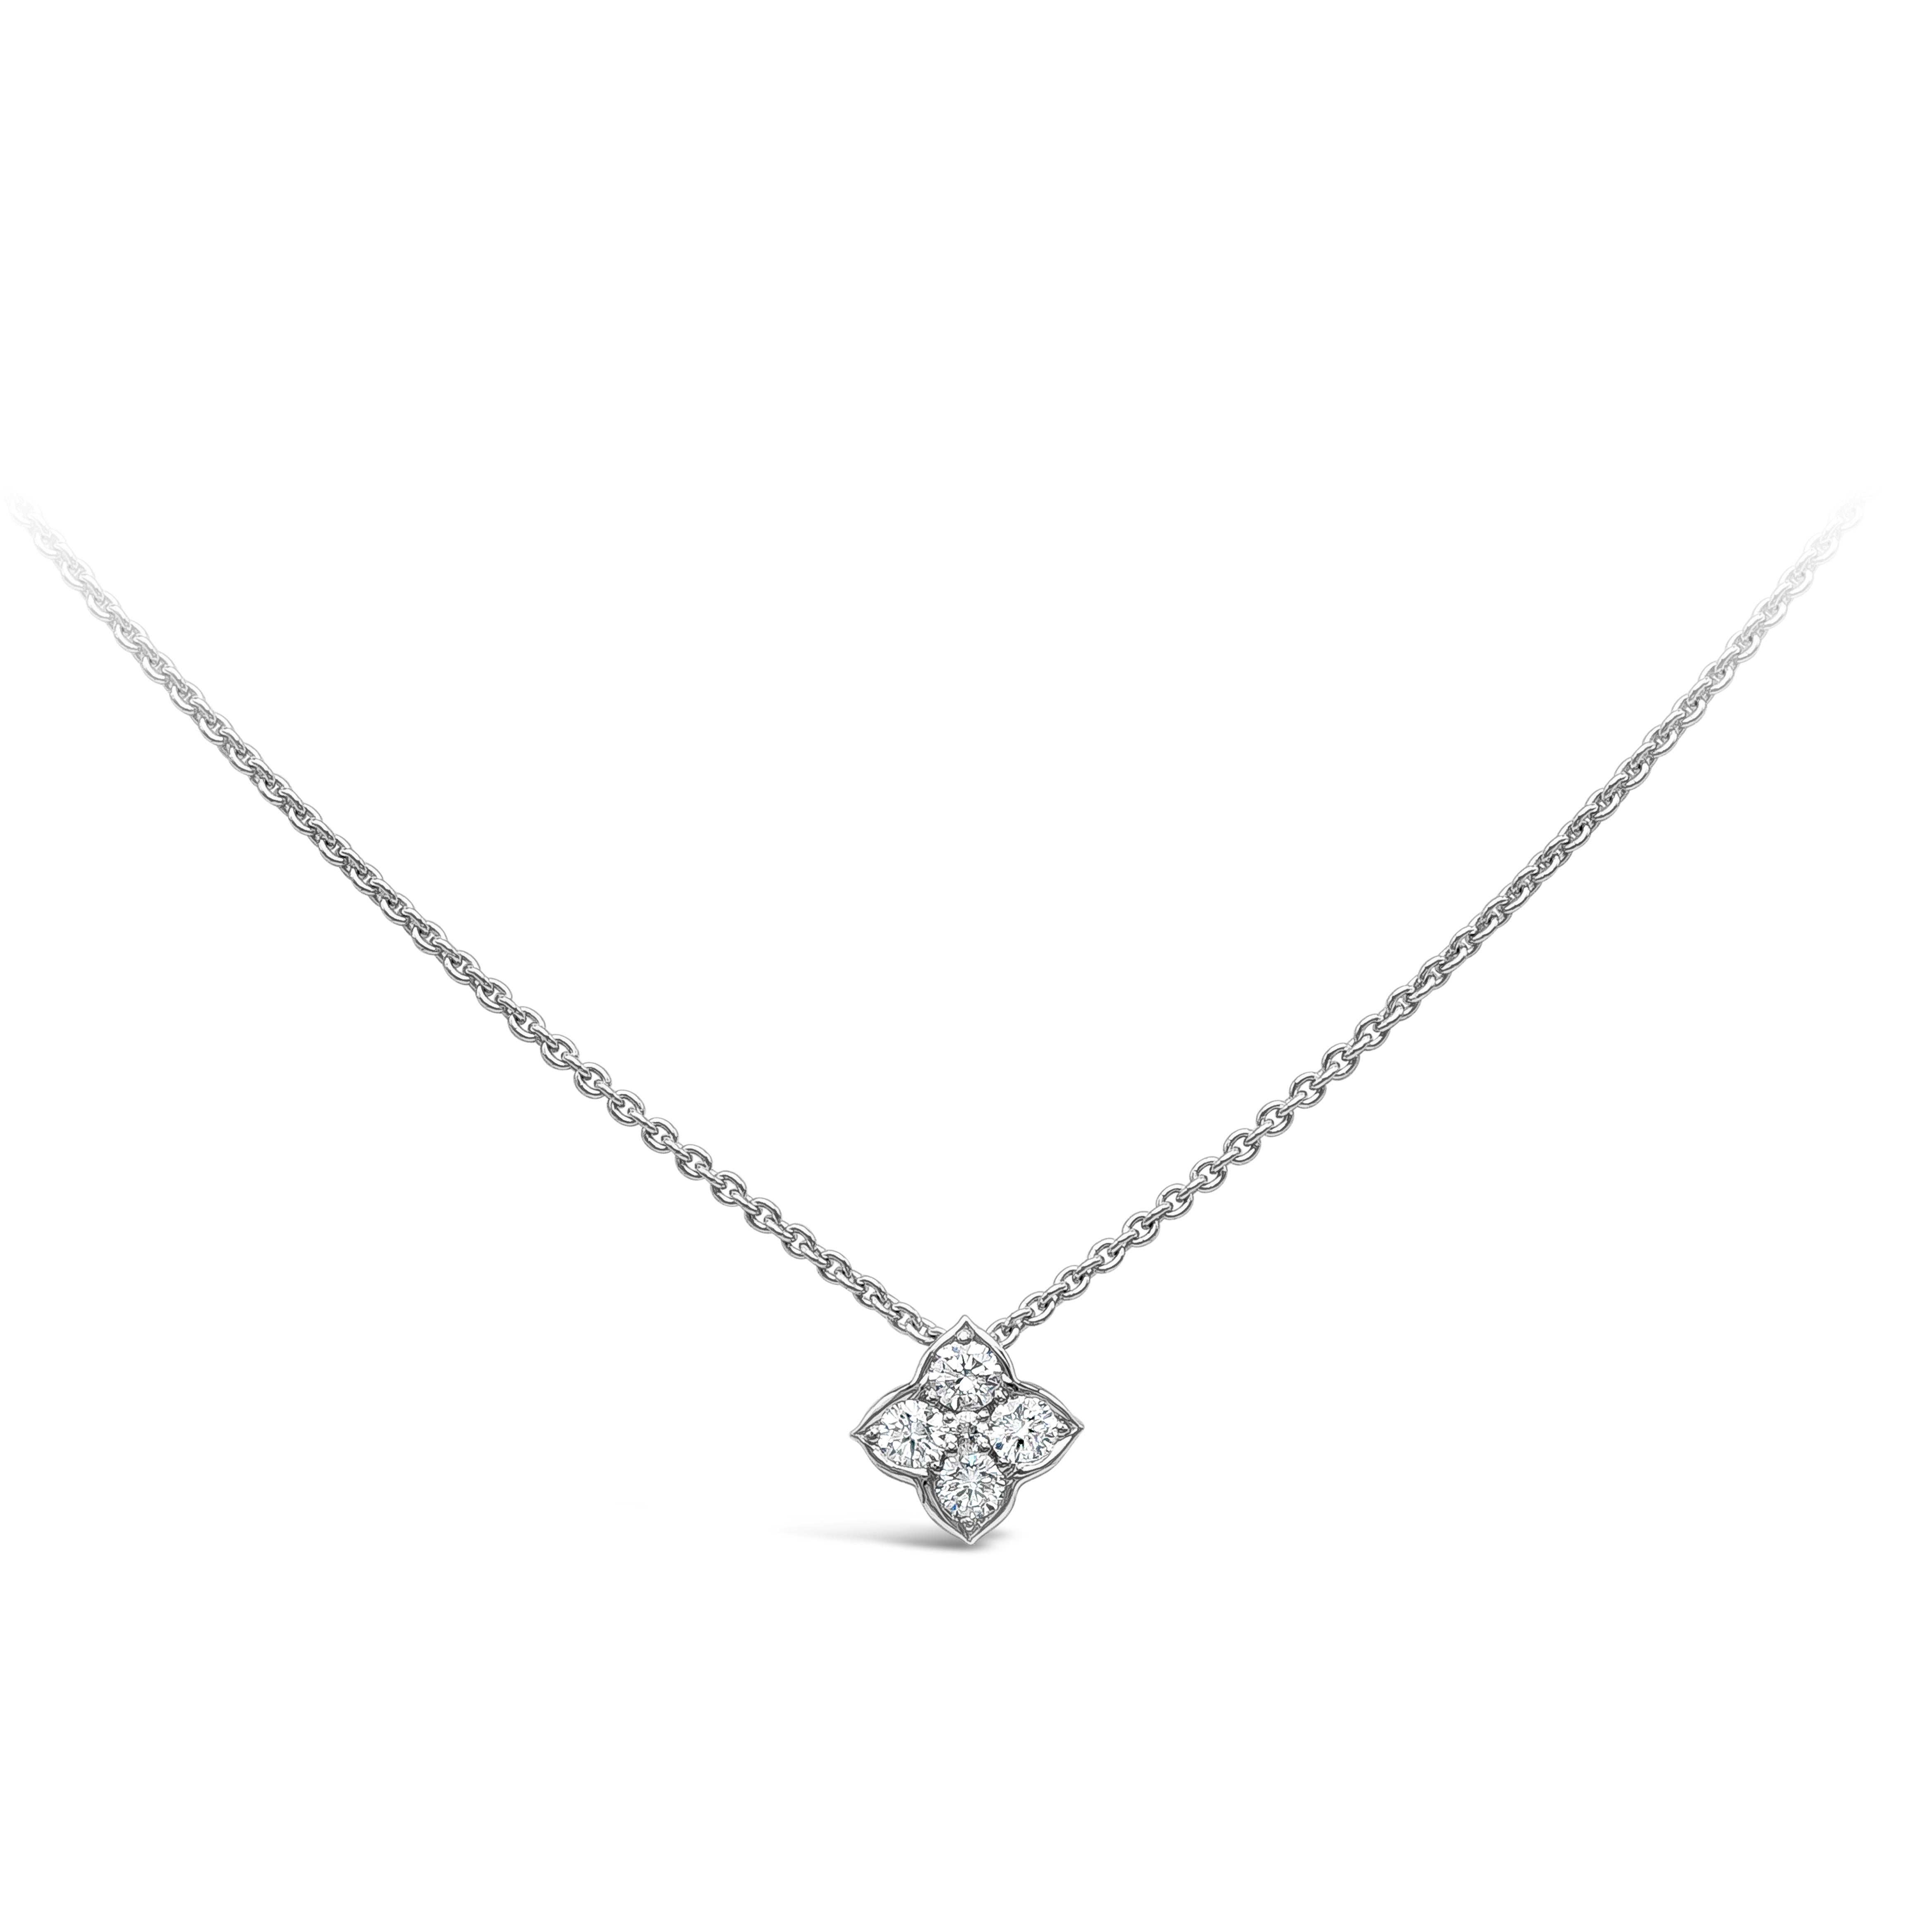 A simple yet beautiful pendant necklace showcasing four round brilliant diamonds set in a flower designed setting. Diamonds weigh 0.47 carats total. Made in 18k white gold. Suspended on an 18 inch white gold chain.

Roman Malakov is a custom house,